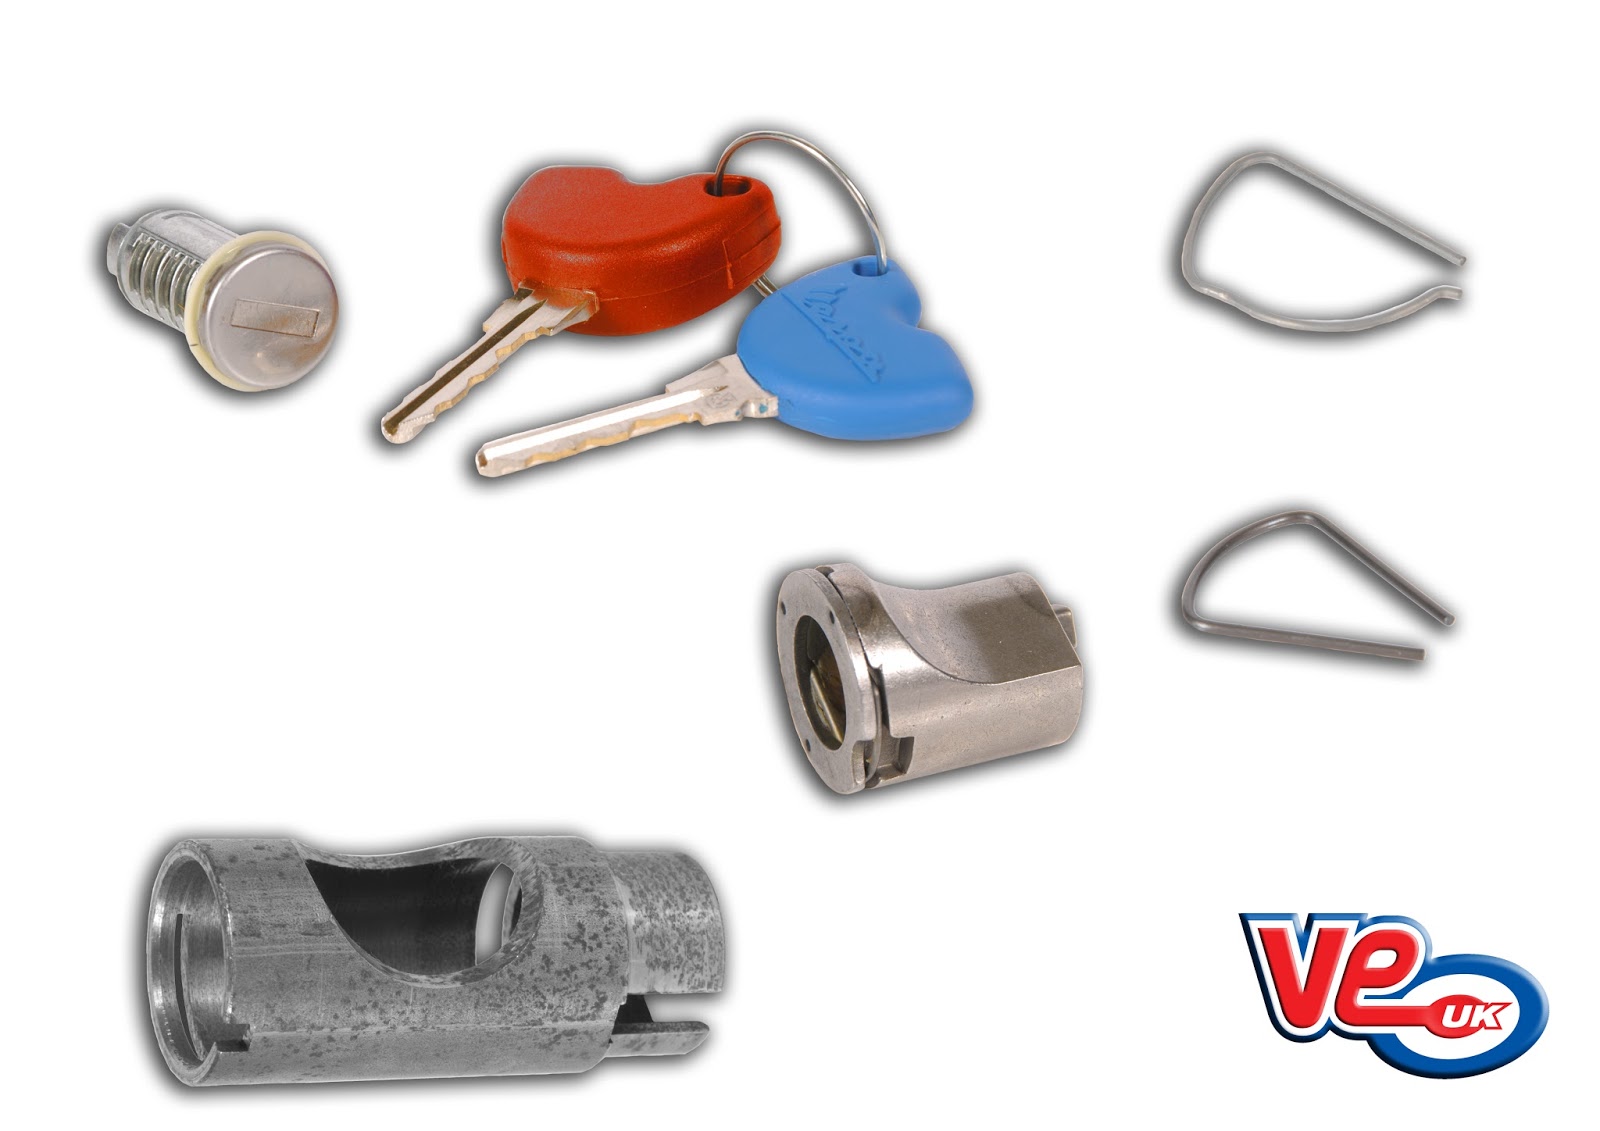 VE Scooter Spares: NEW - Vespa GT\/GTS Replacement Lock Parts